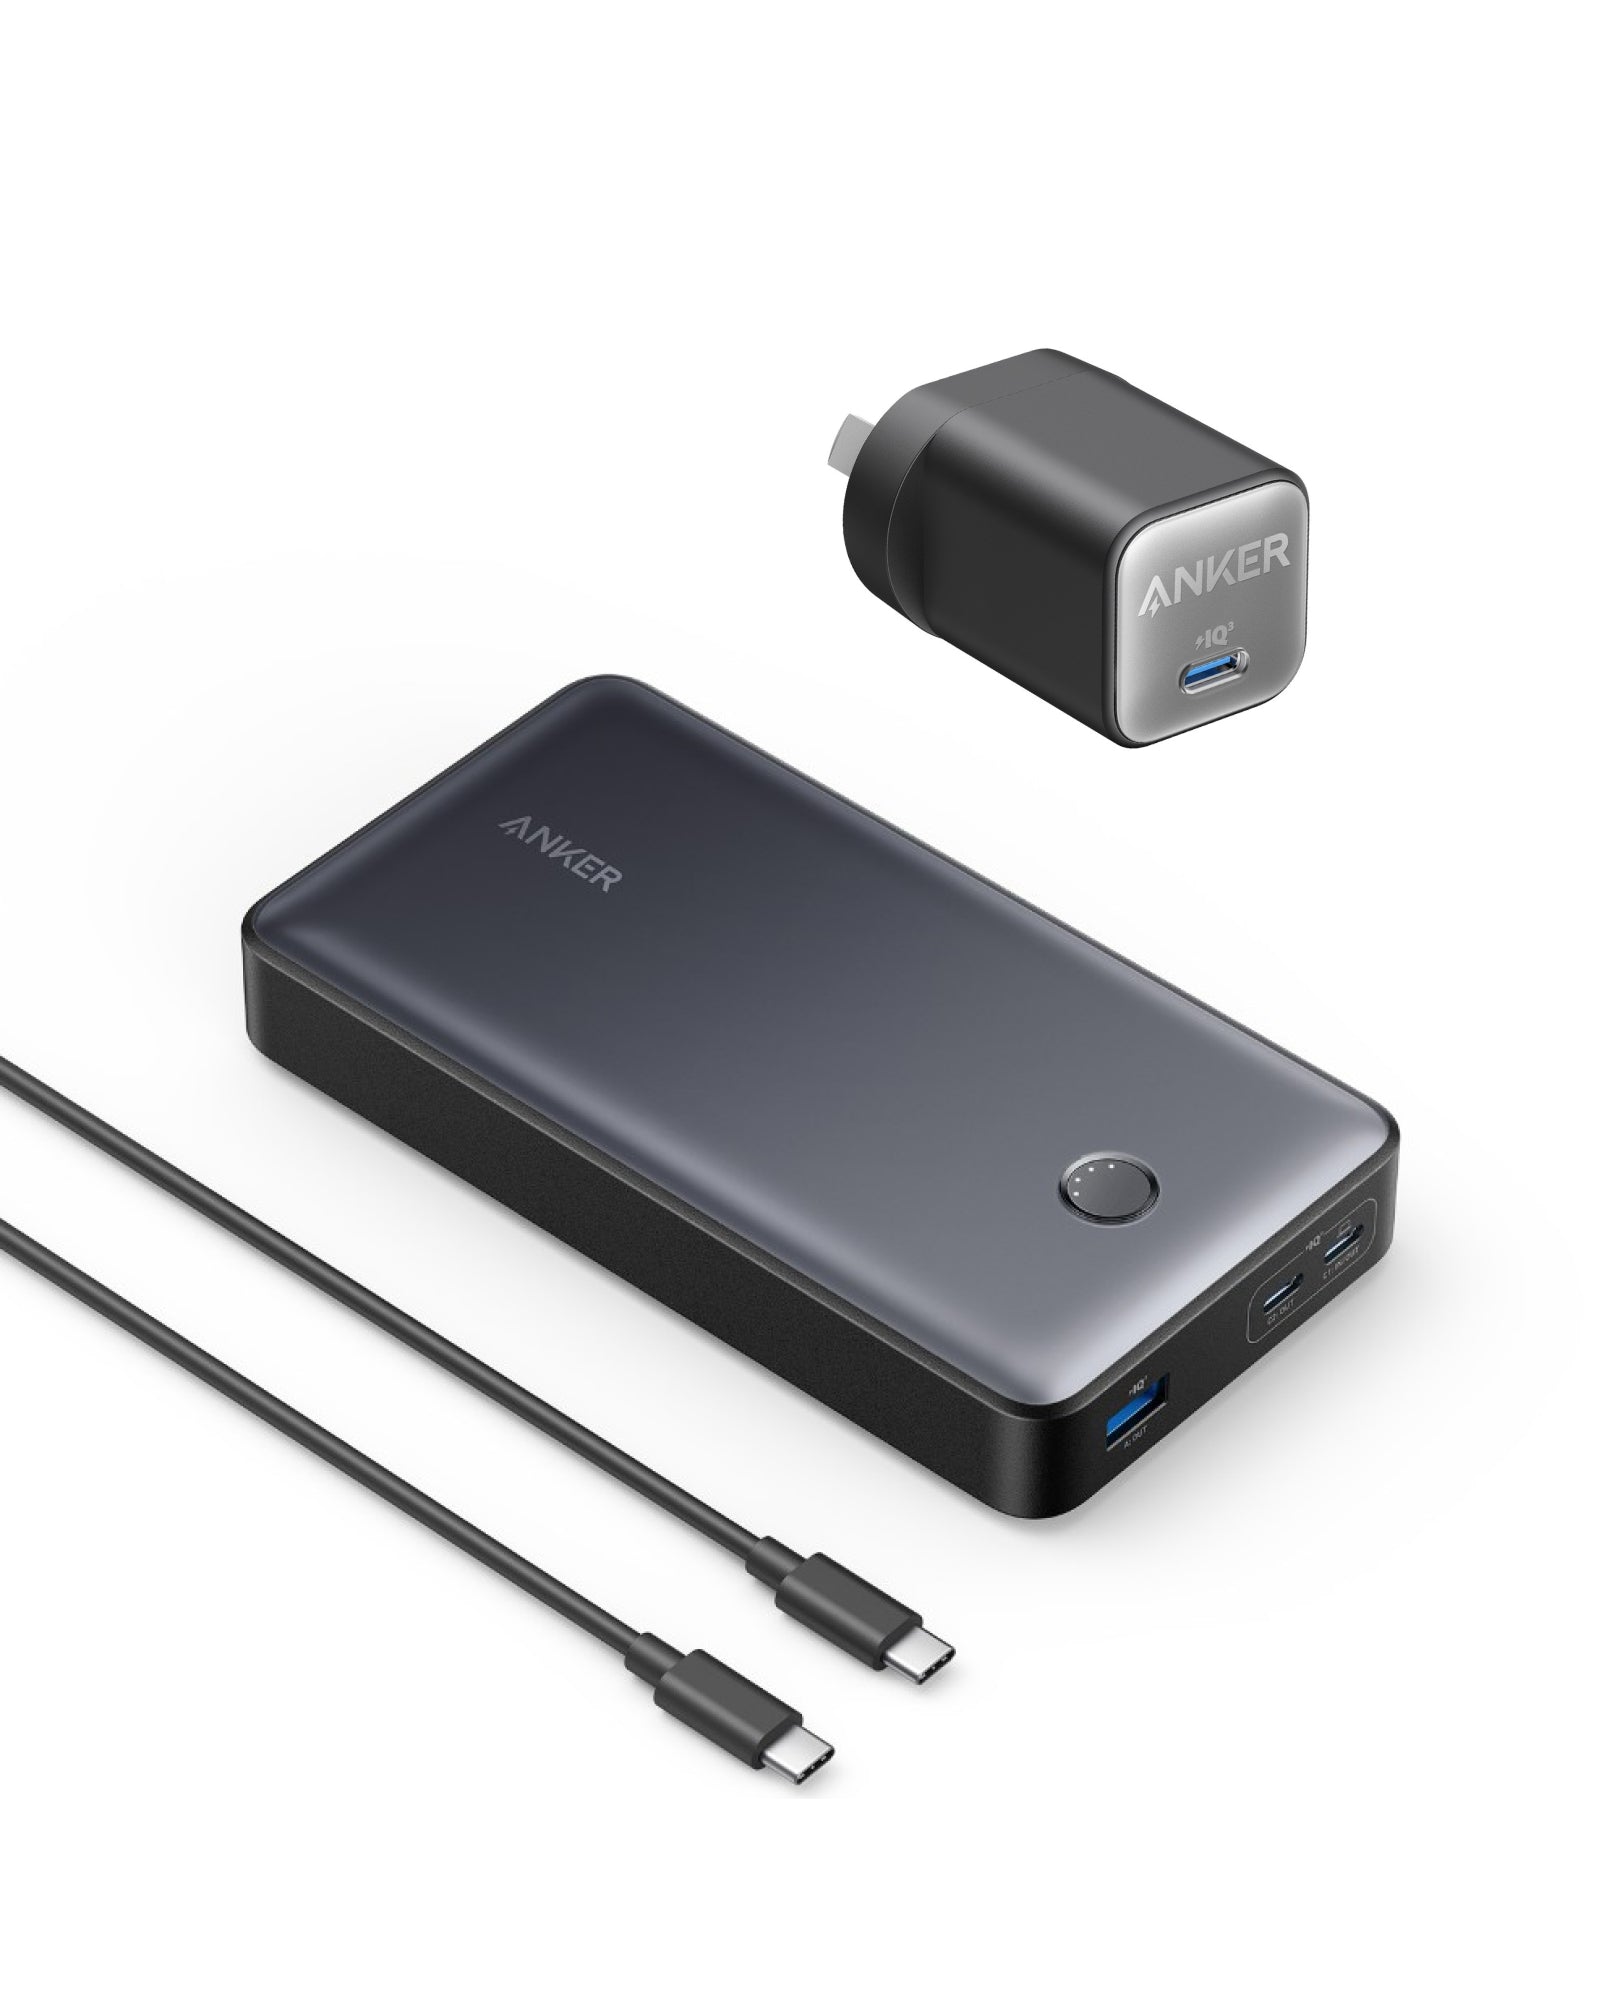 Anker 537 Power Bank (PowerCore 24K)and Anker 735 Charger (Nano II